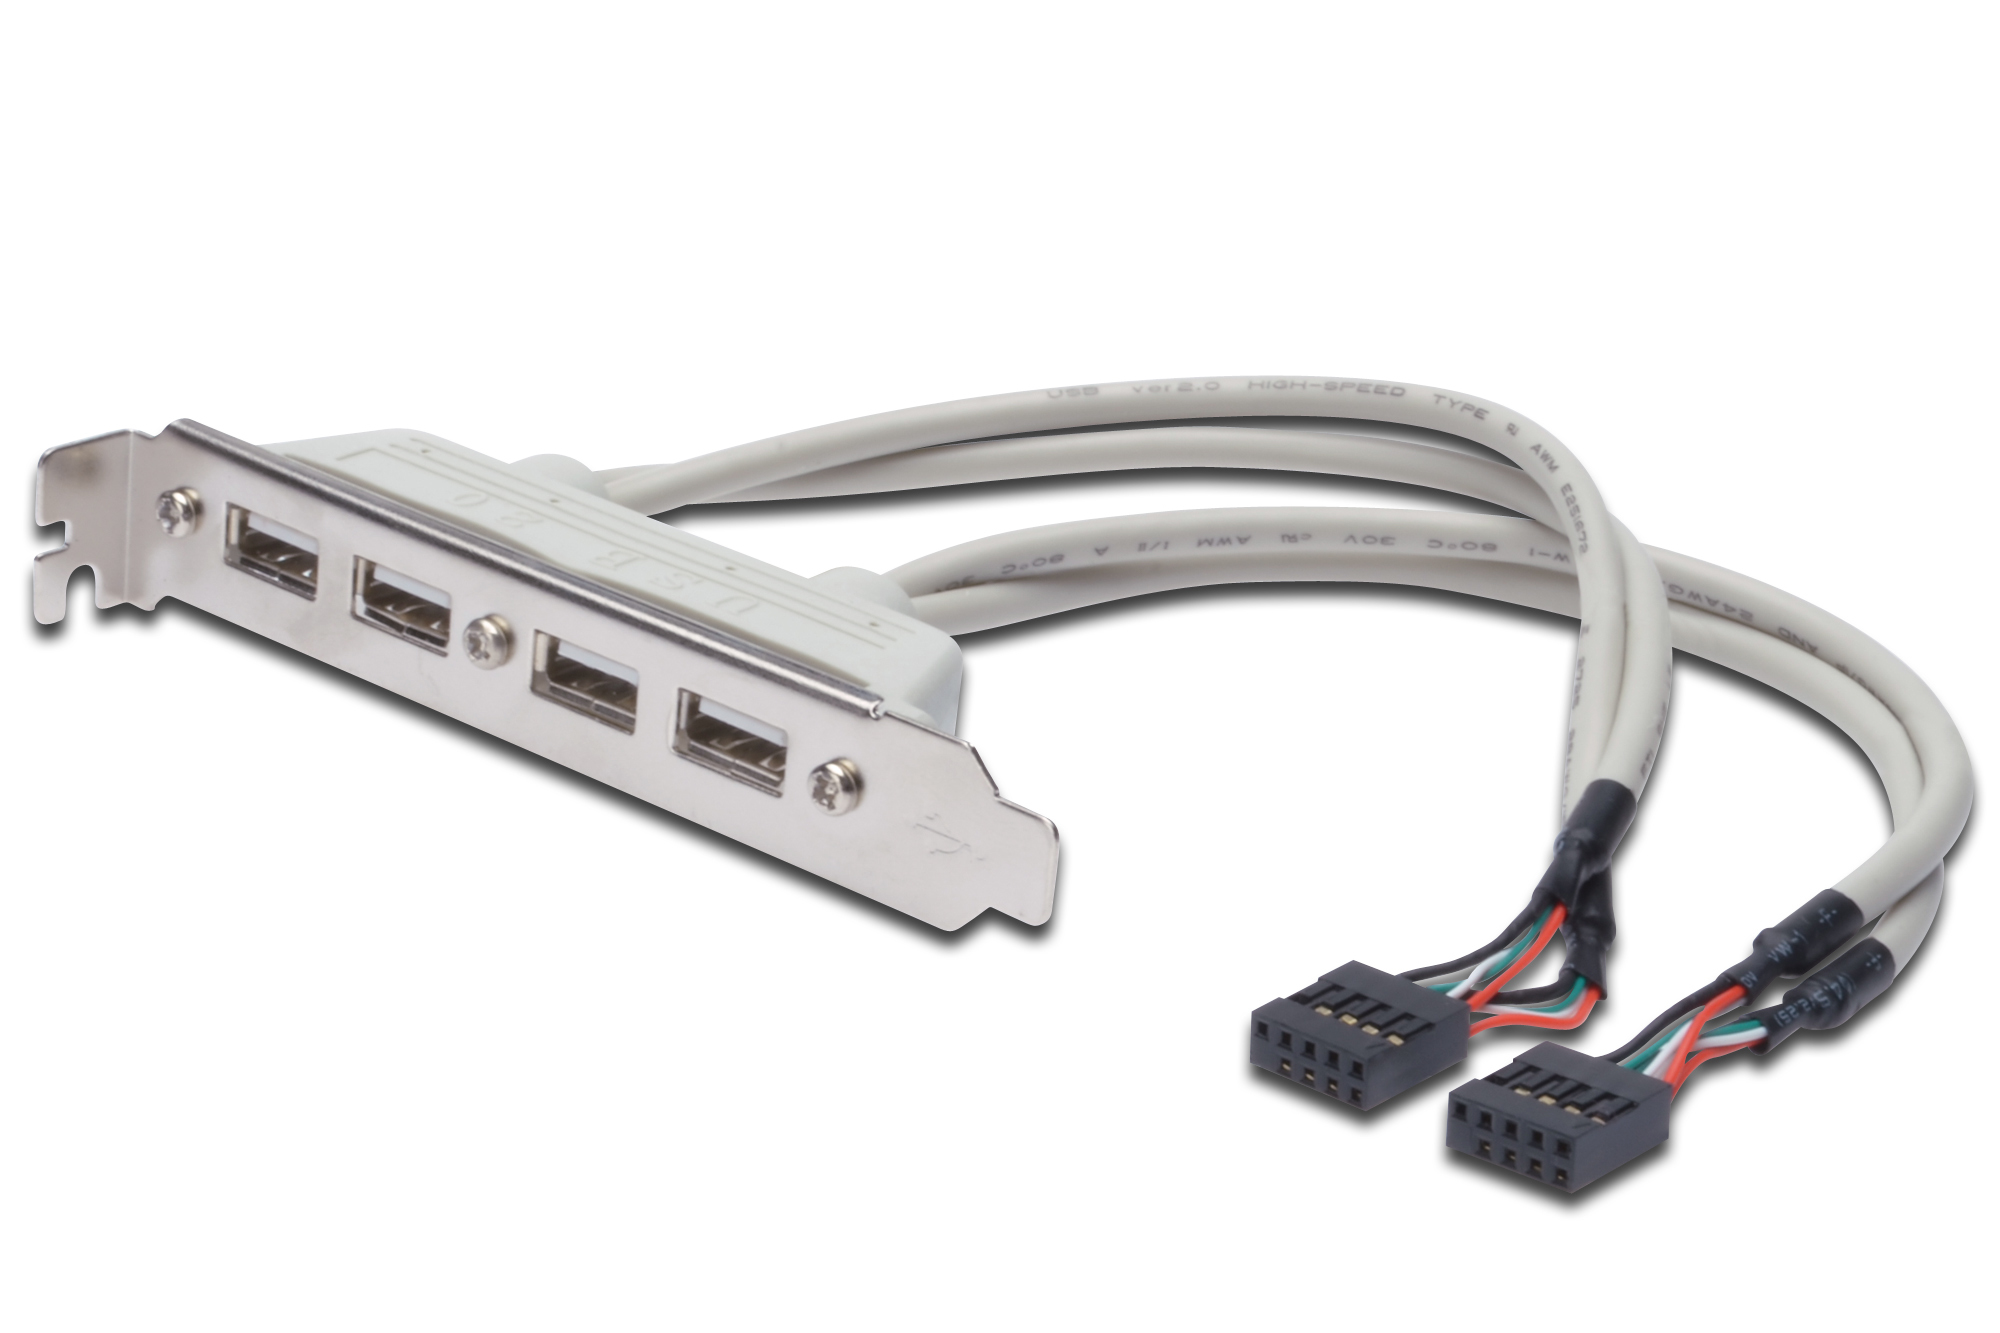 Photos - Other for Computer Digitus USB Slot Bracket Cable AK-300304-002-E 